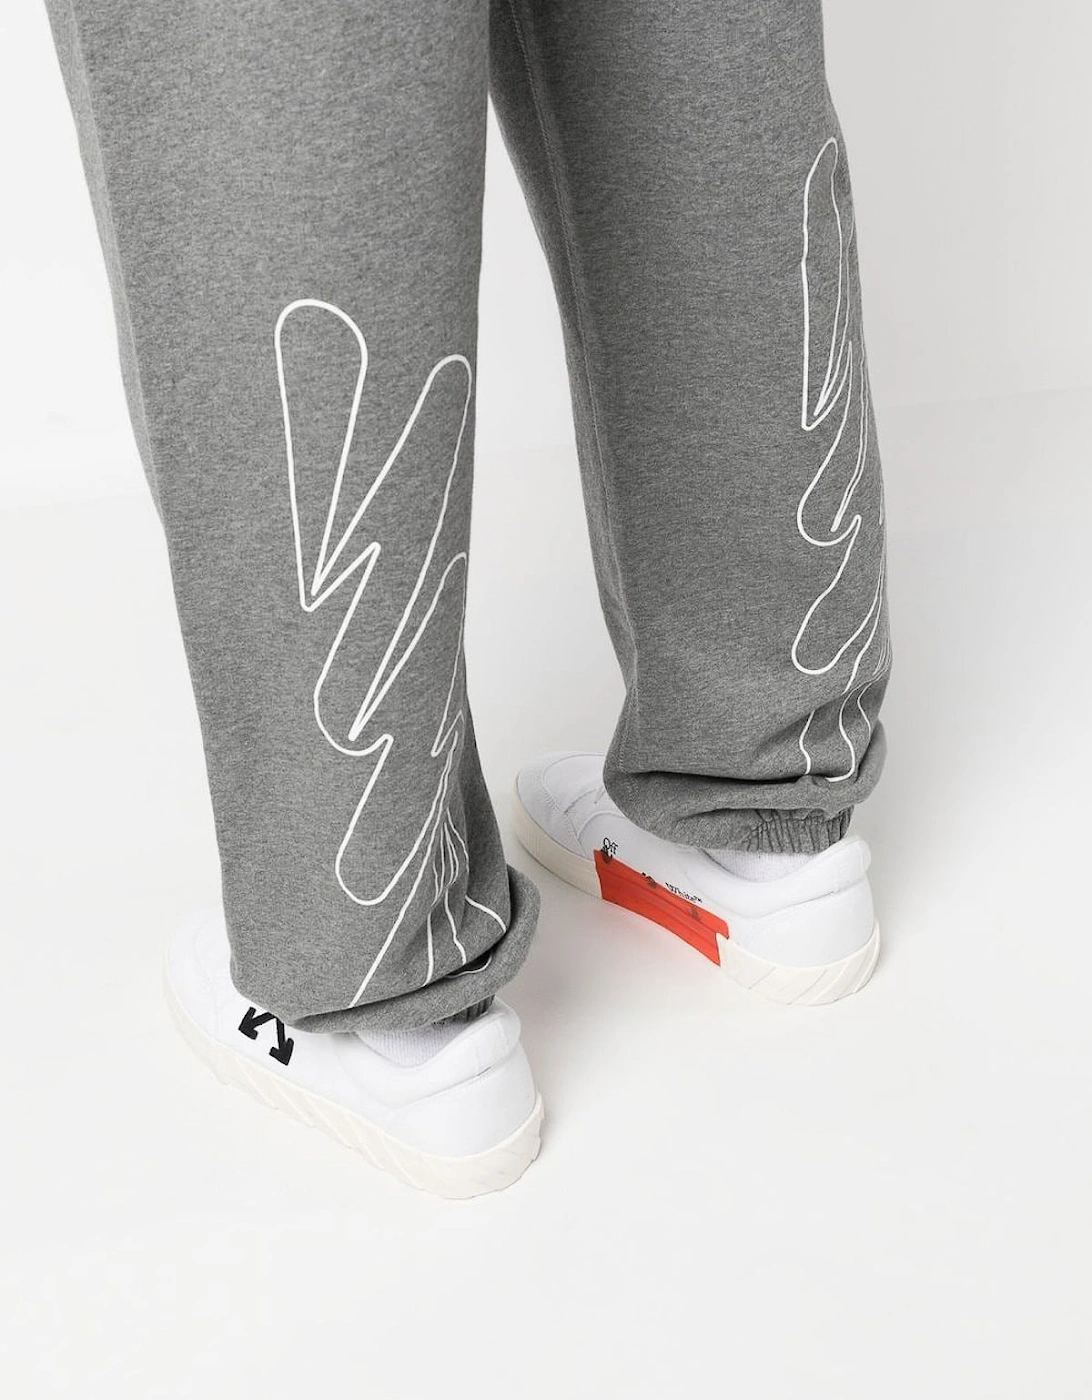 Wave Outline Diagonal Printed Joggers in Grey